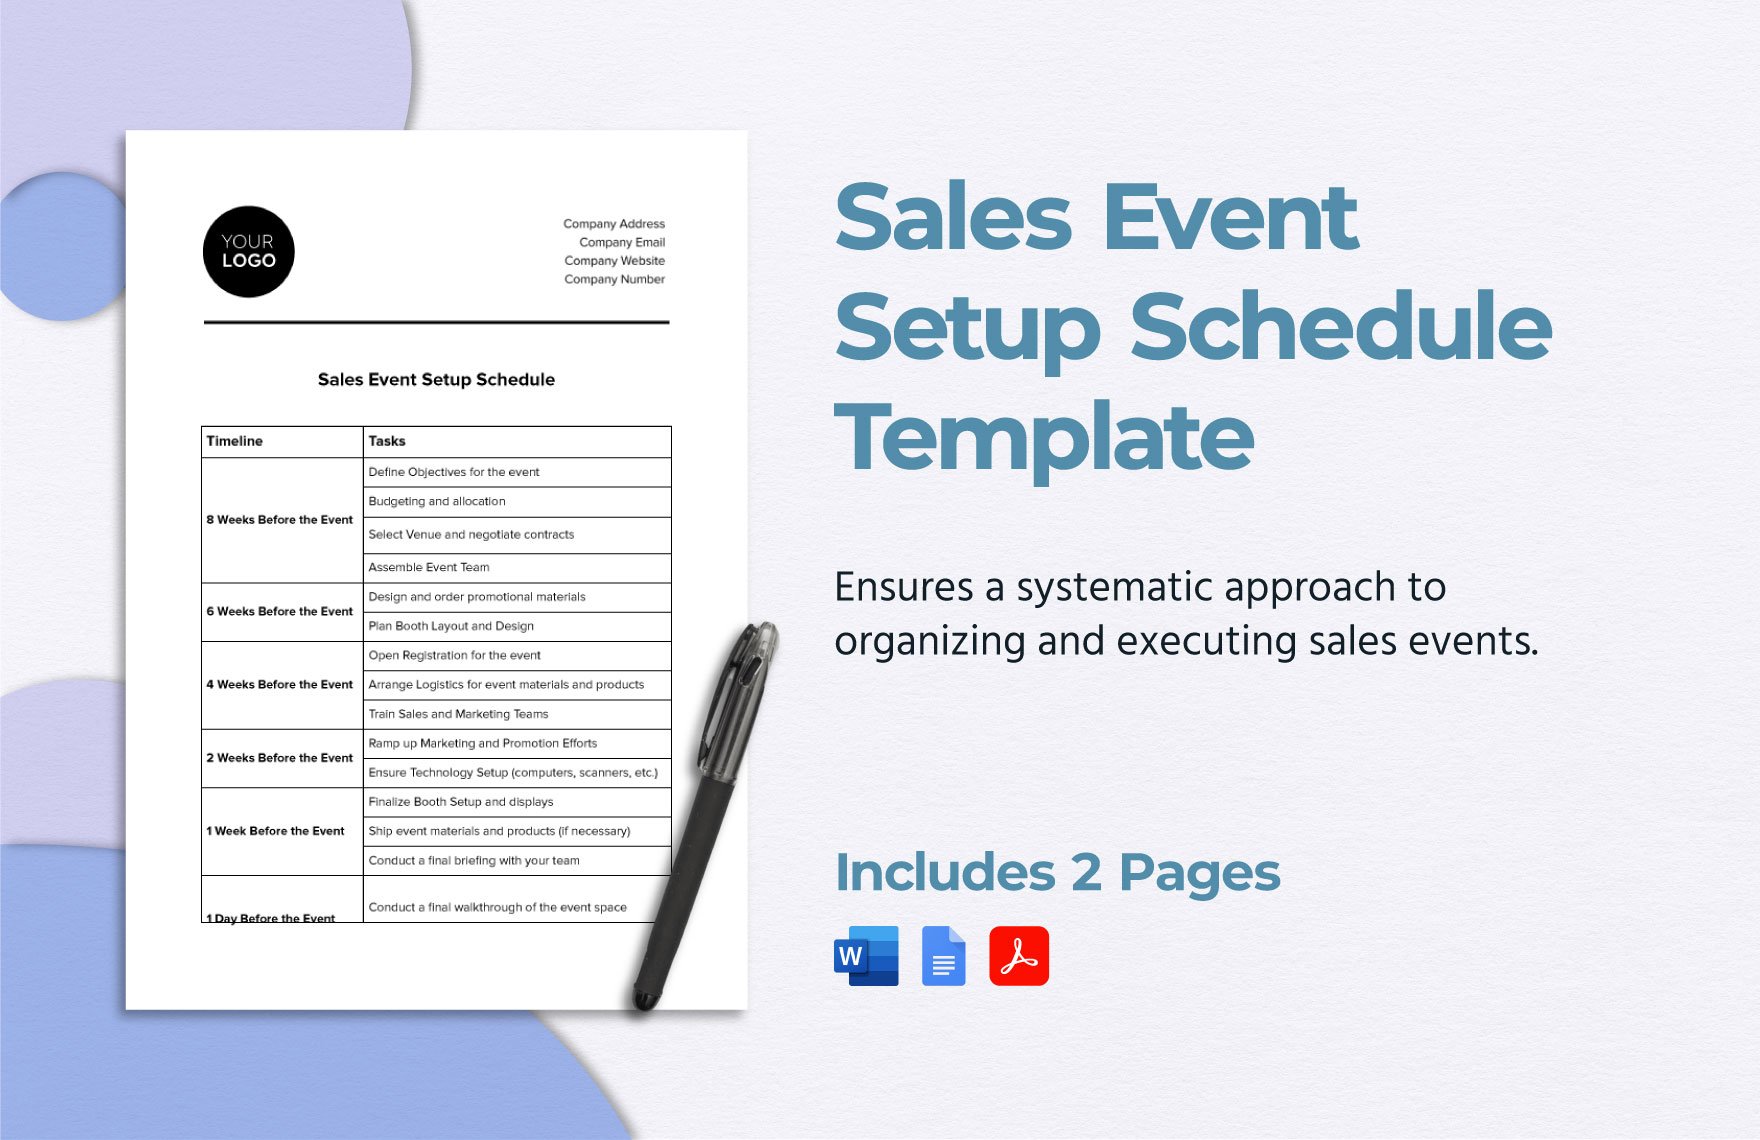 Sales Event Setup Schedule Template in Word, Google Docs, PDF